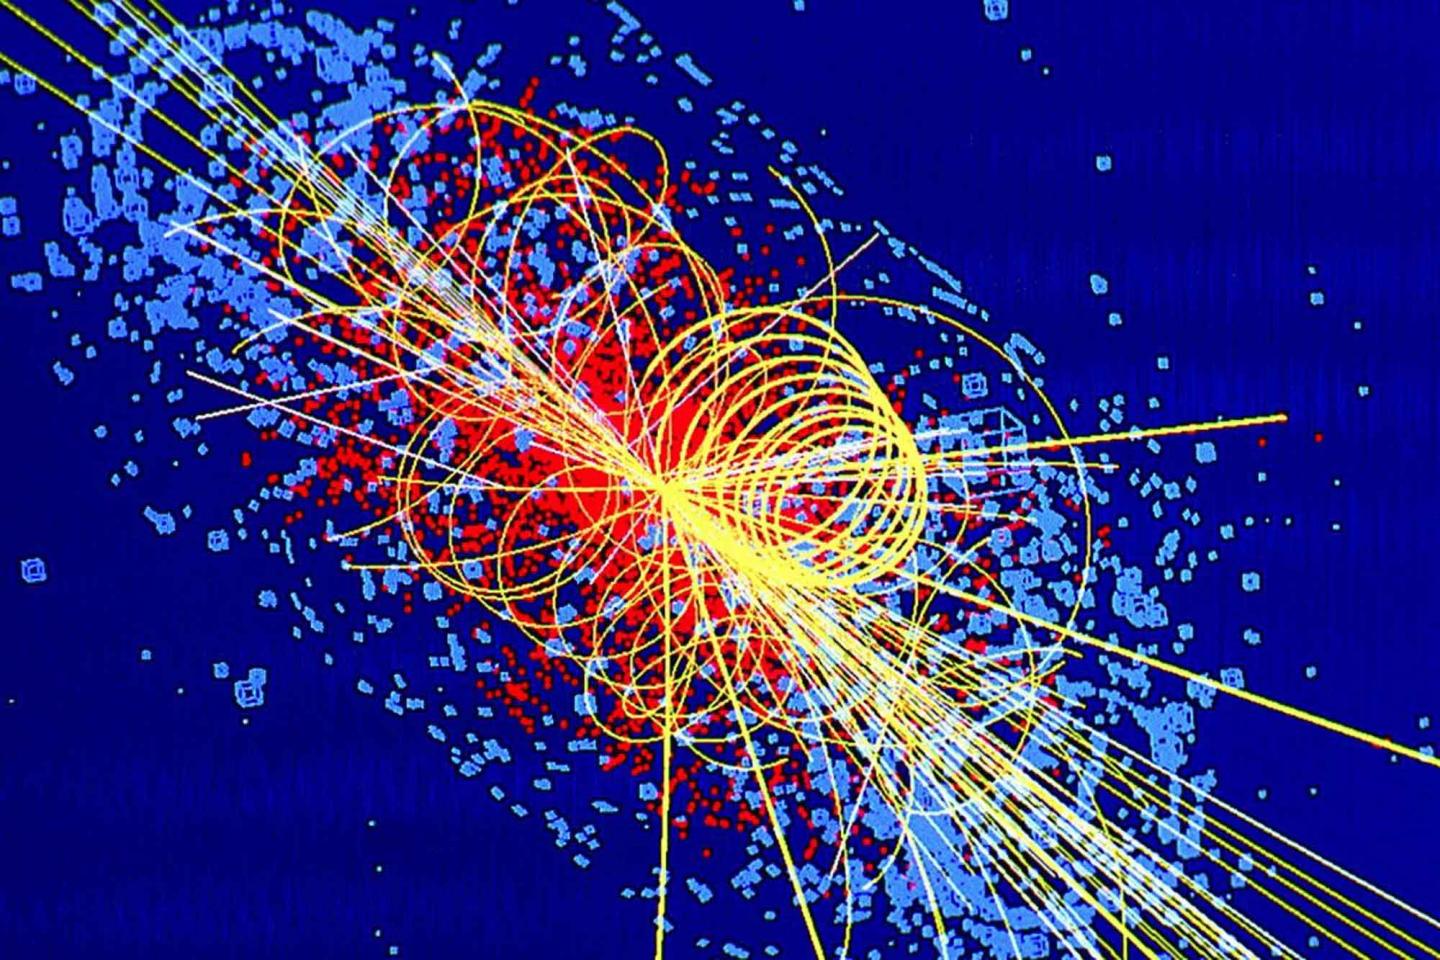 The Higgs boson: One year on